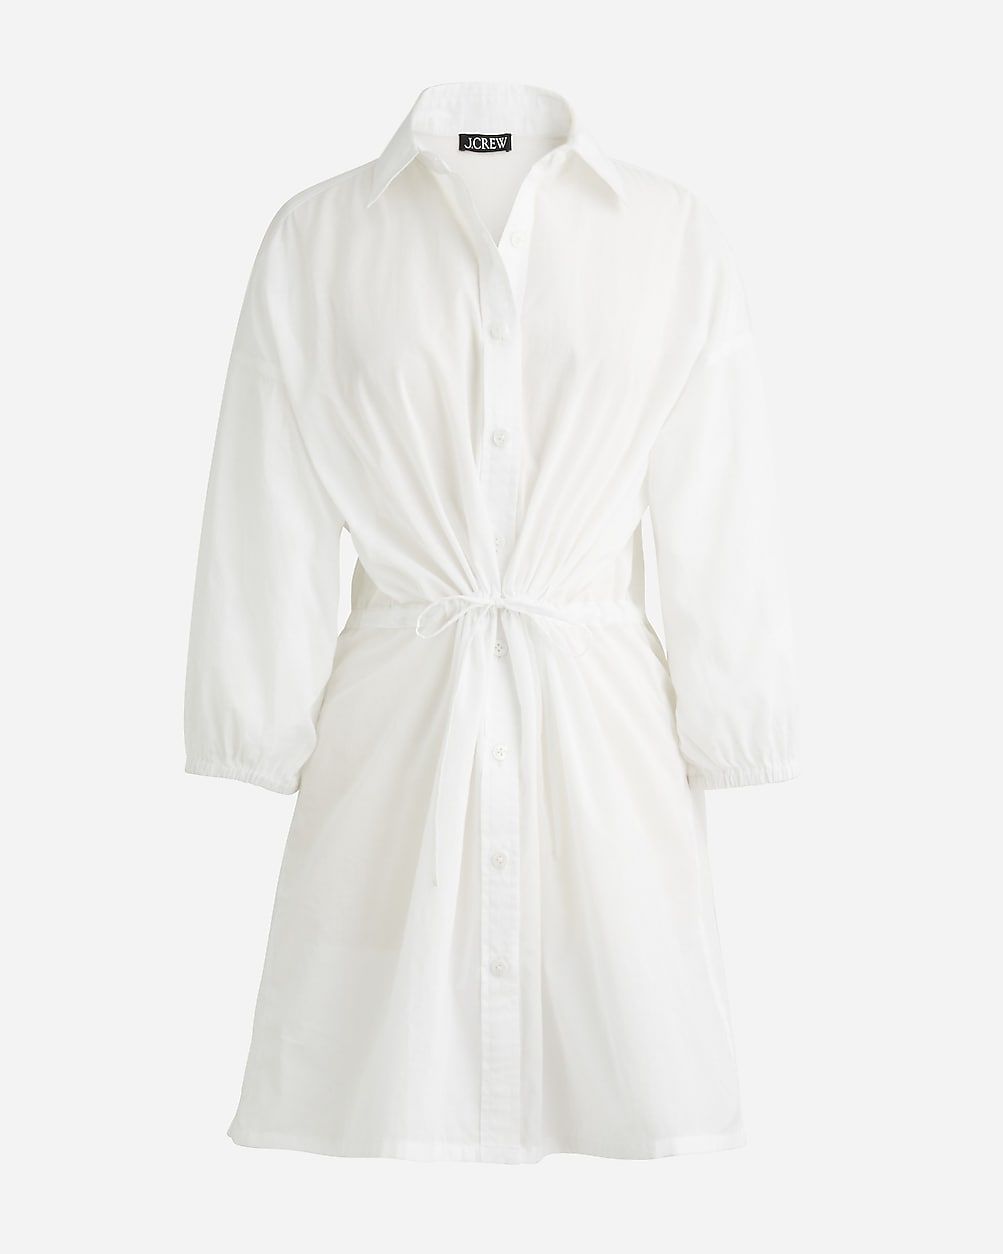 Cinched shirtdress in sheer cotton voile | J.Crew US